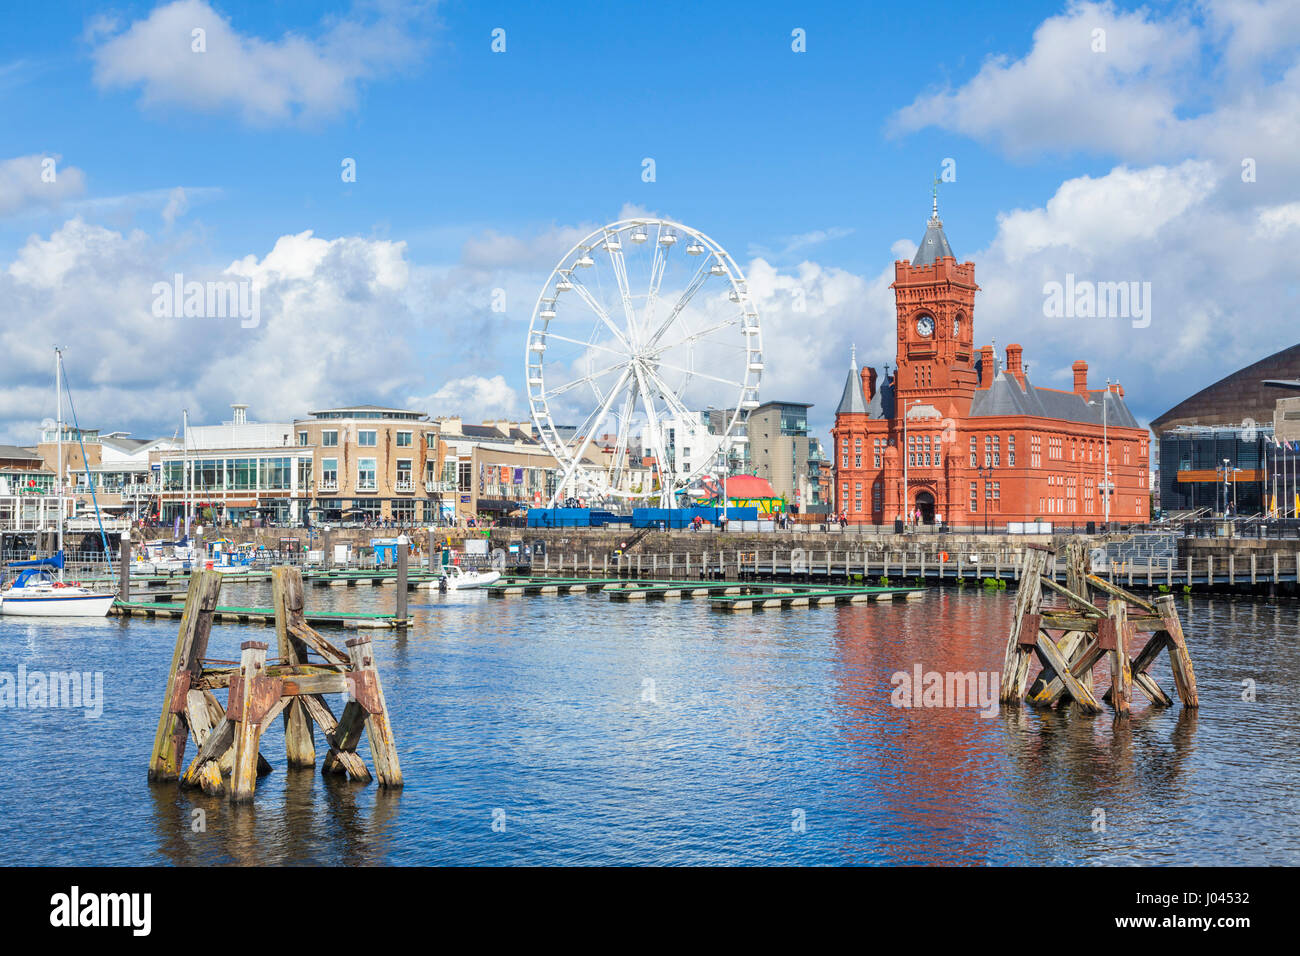 Cardiff Bay Grande roue carousel waterfront Pierhead Building Cardiff Bay Cardiff South Glamorgan South Wales GB UK EU Europe Banque D'Images